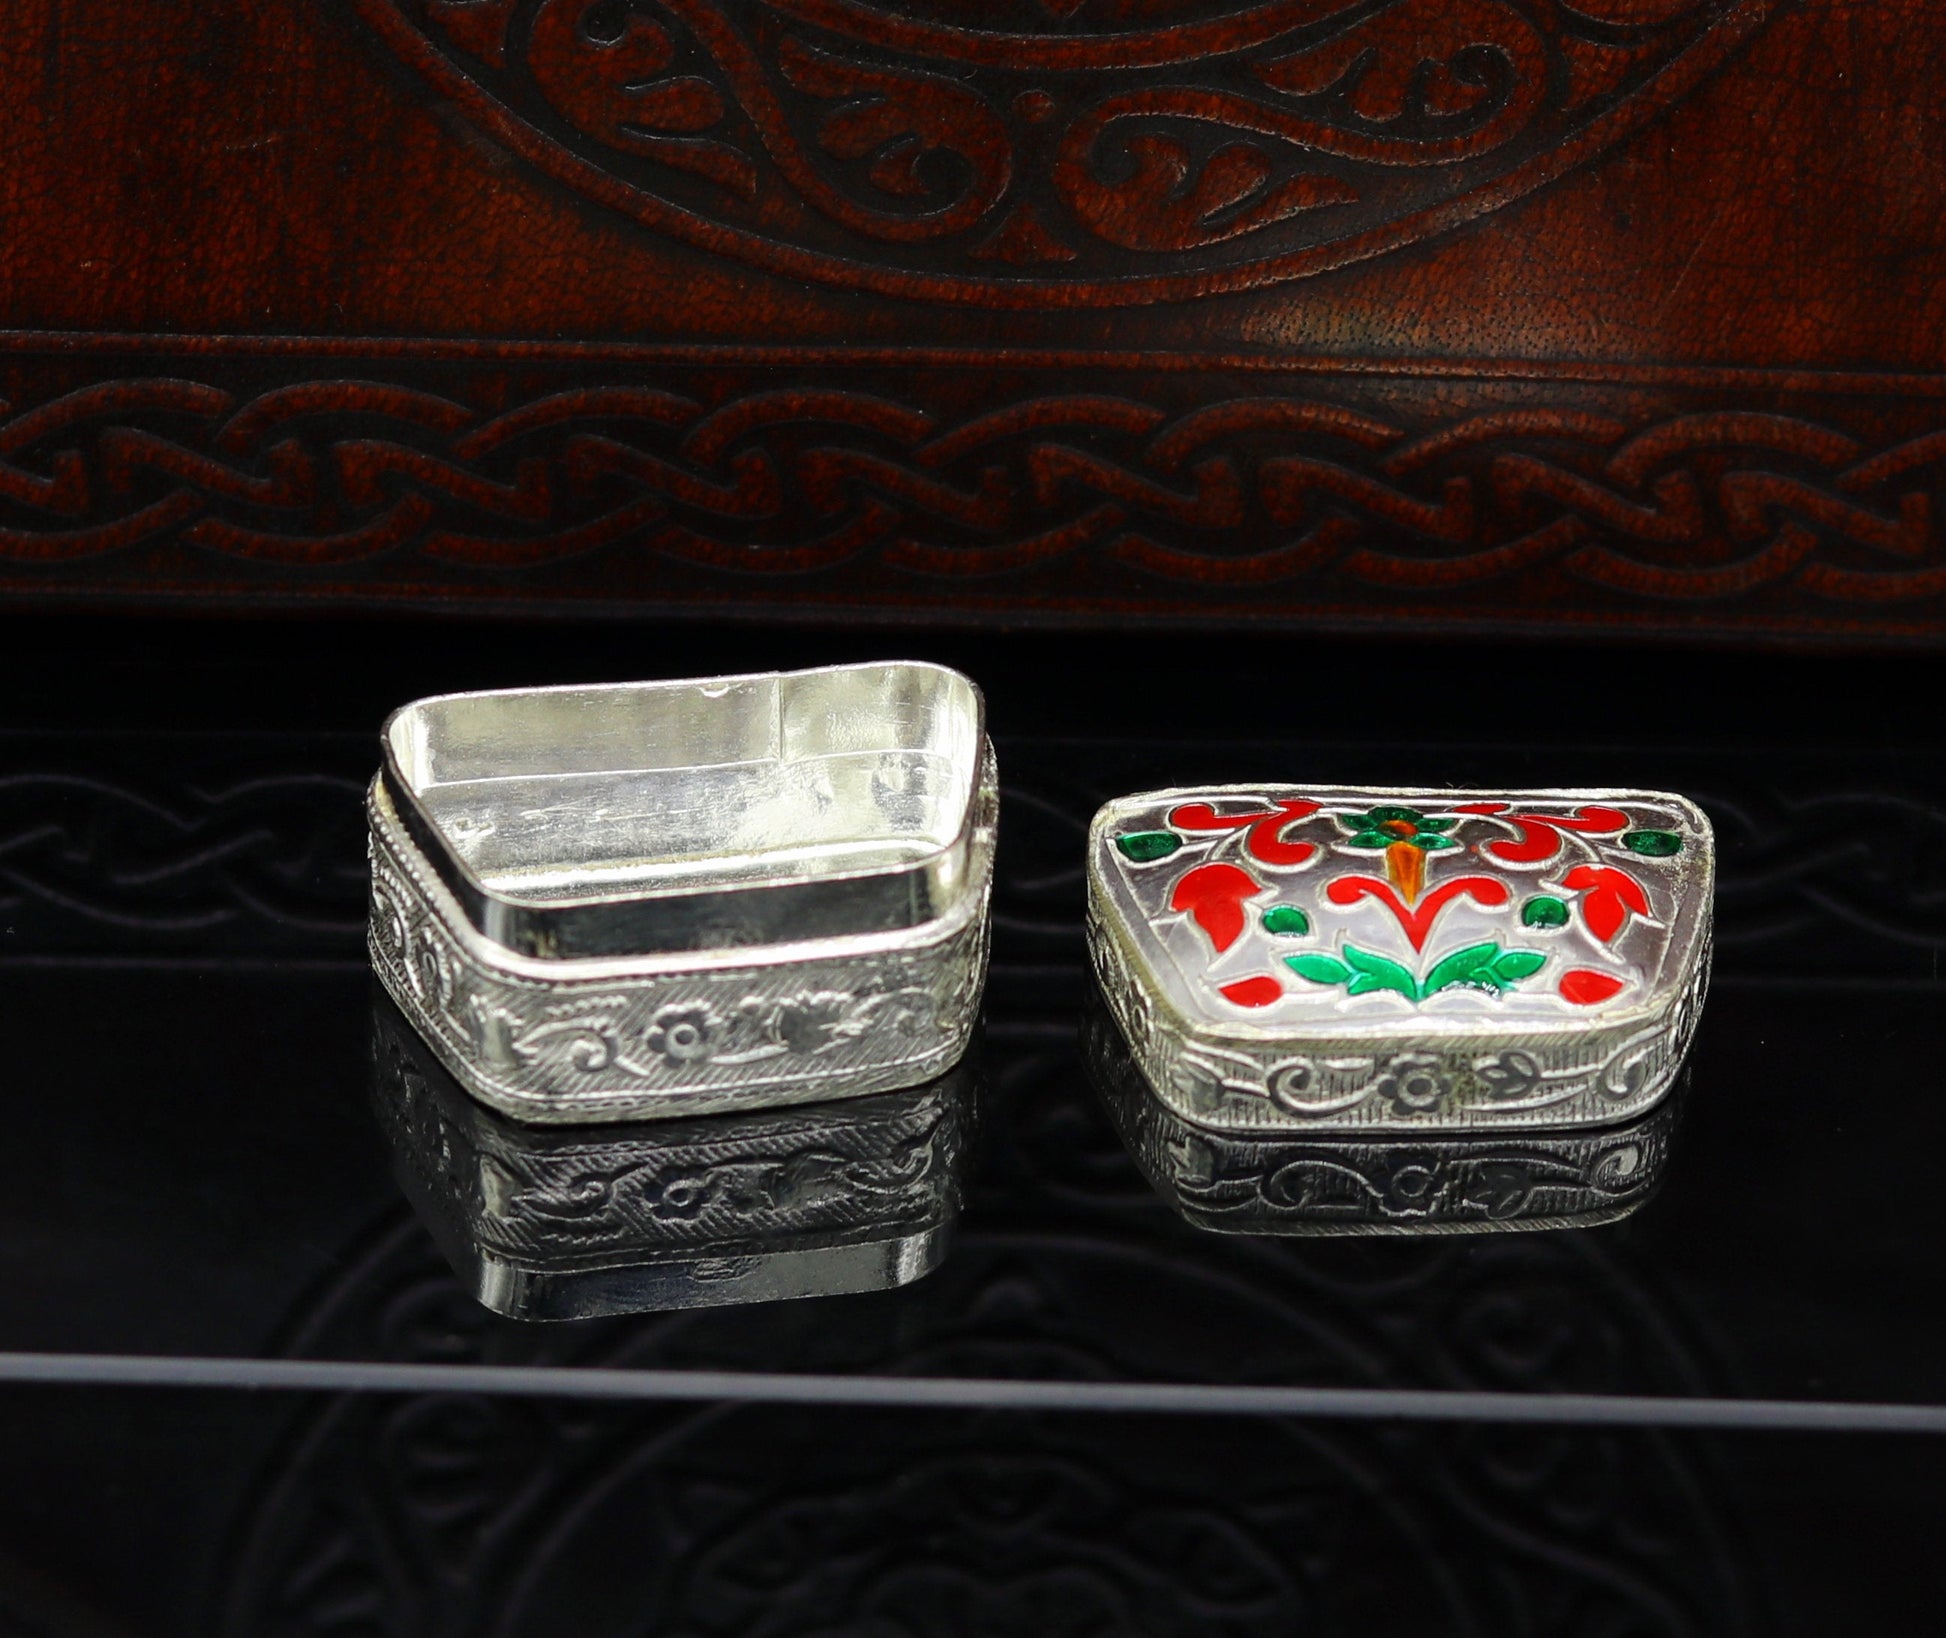 Enamel floral work 925 solid silver utensils trinket box, casket box, container box, jewelry box, silver utensils, vessels bridal gift stb60 - TRIBAL ORNAMENTS